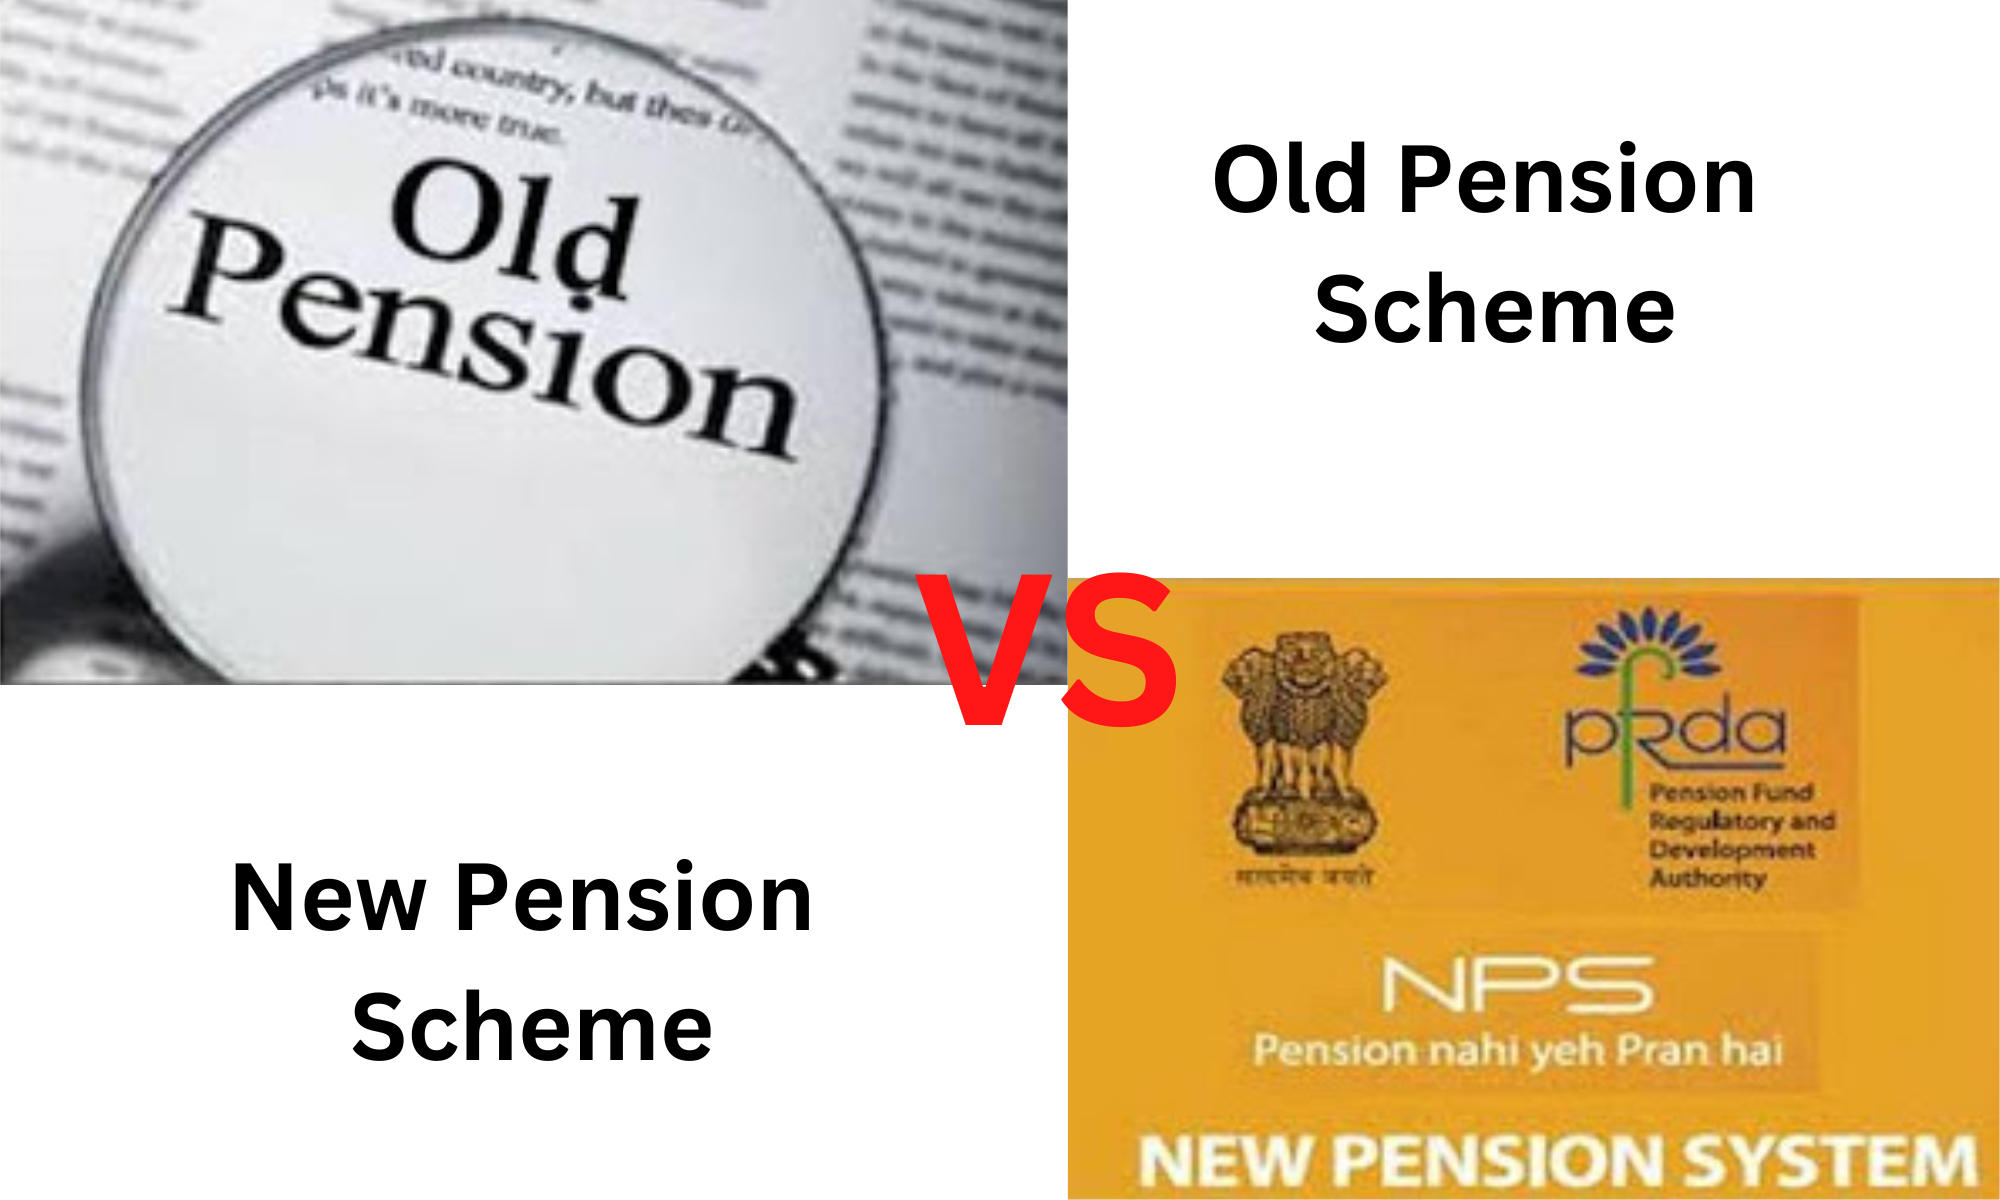 New pension scheme vs old pension scheme, Find out which is better?_40.1